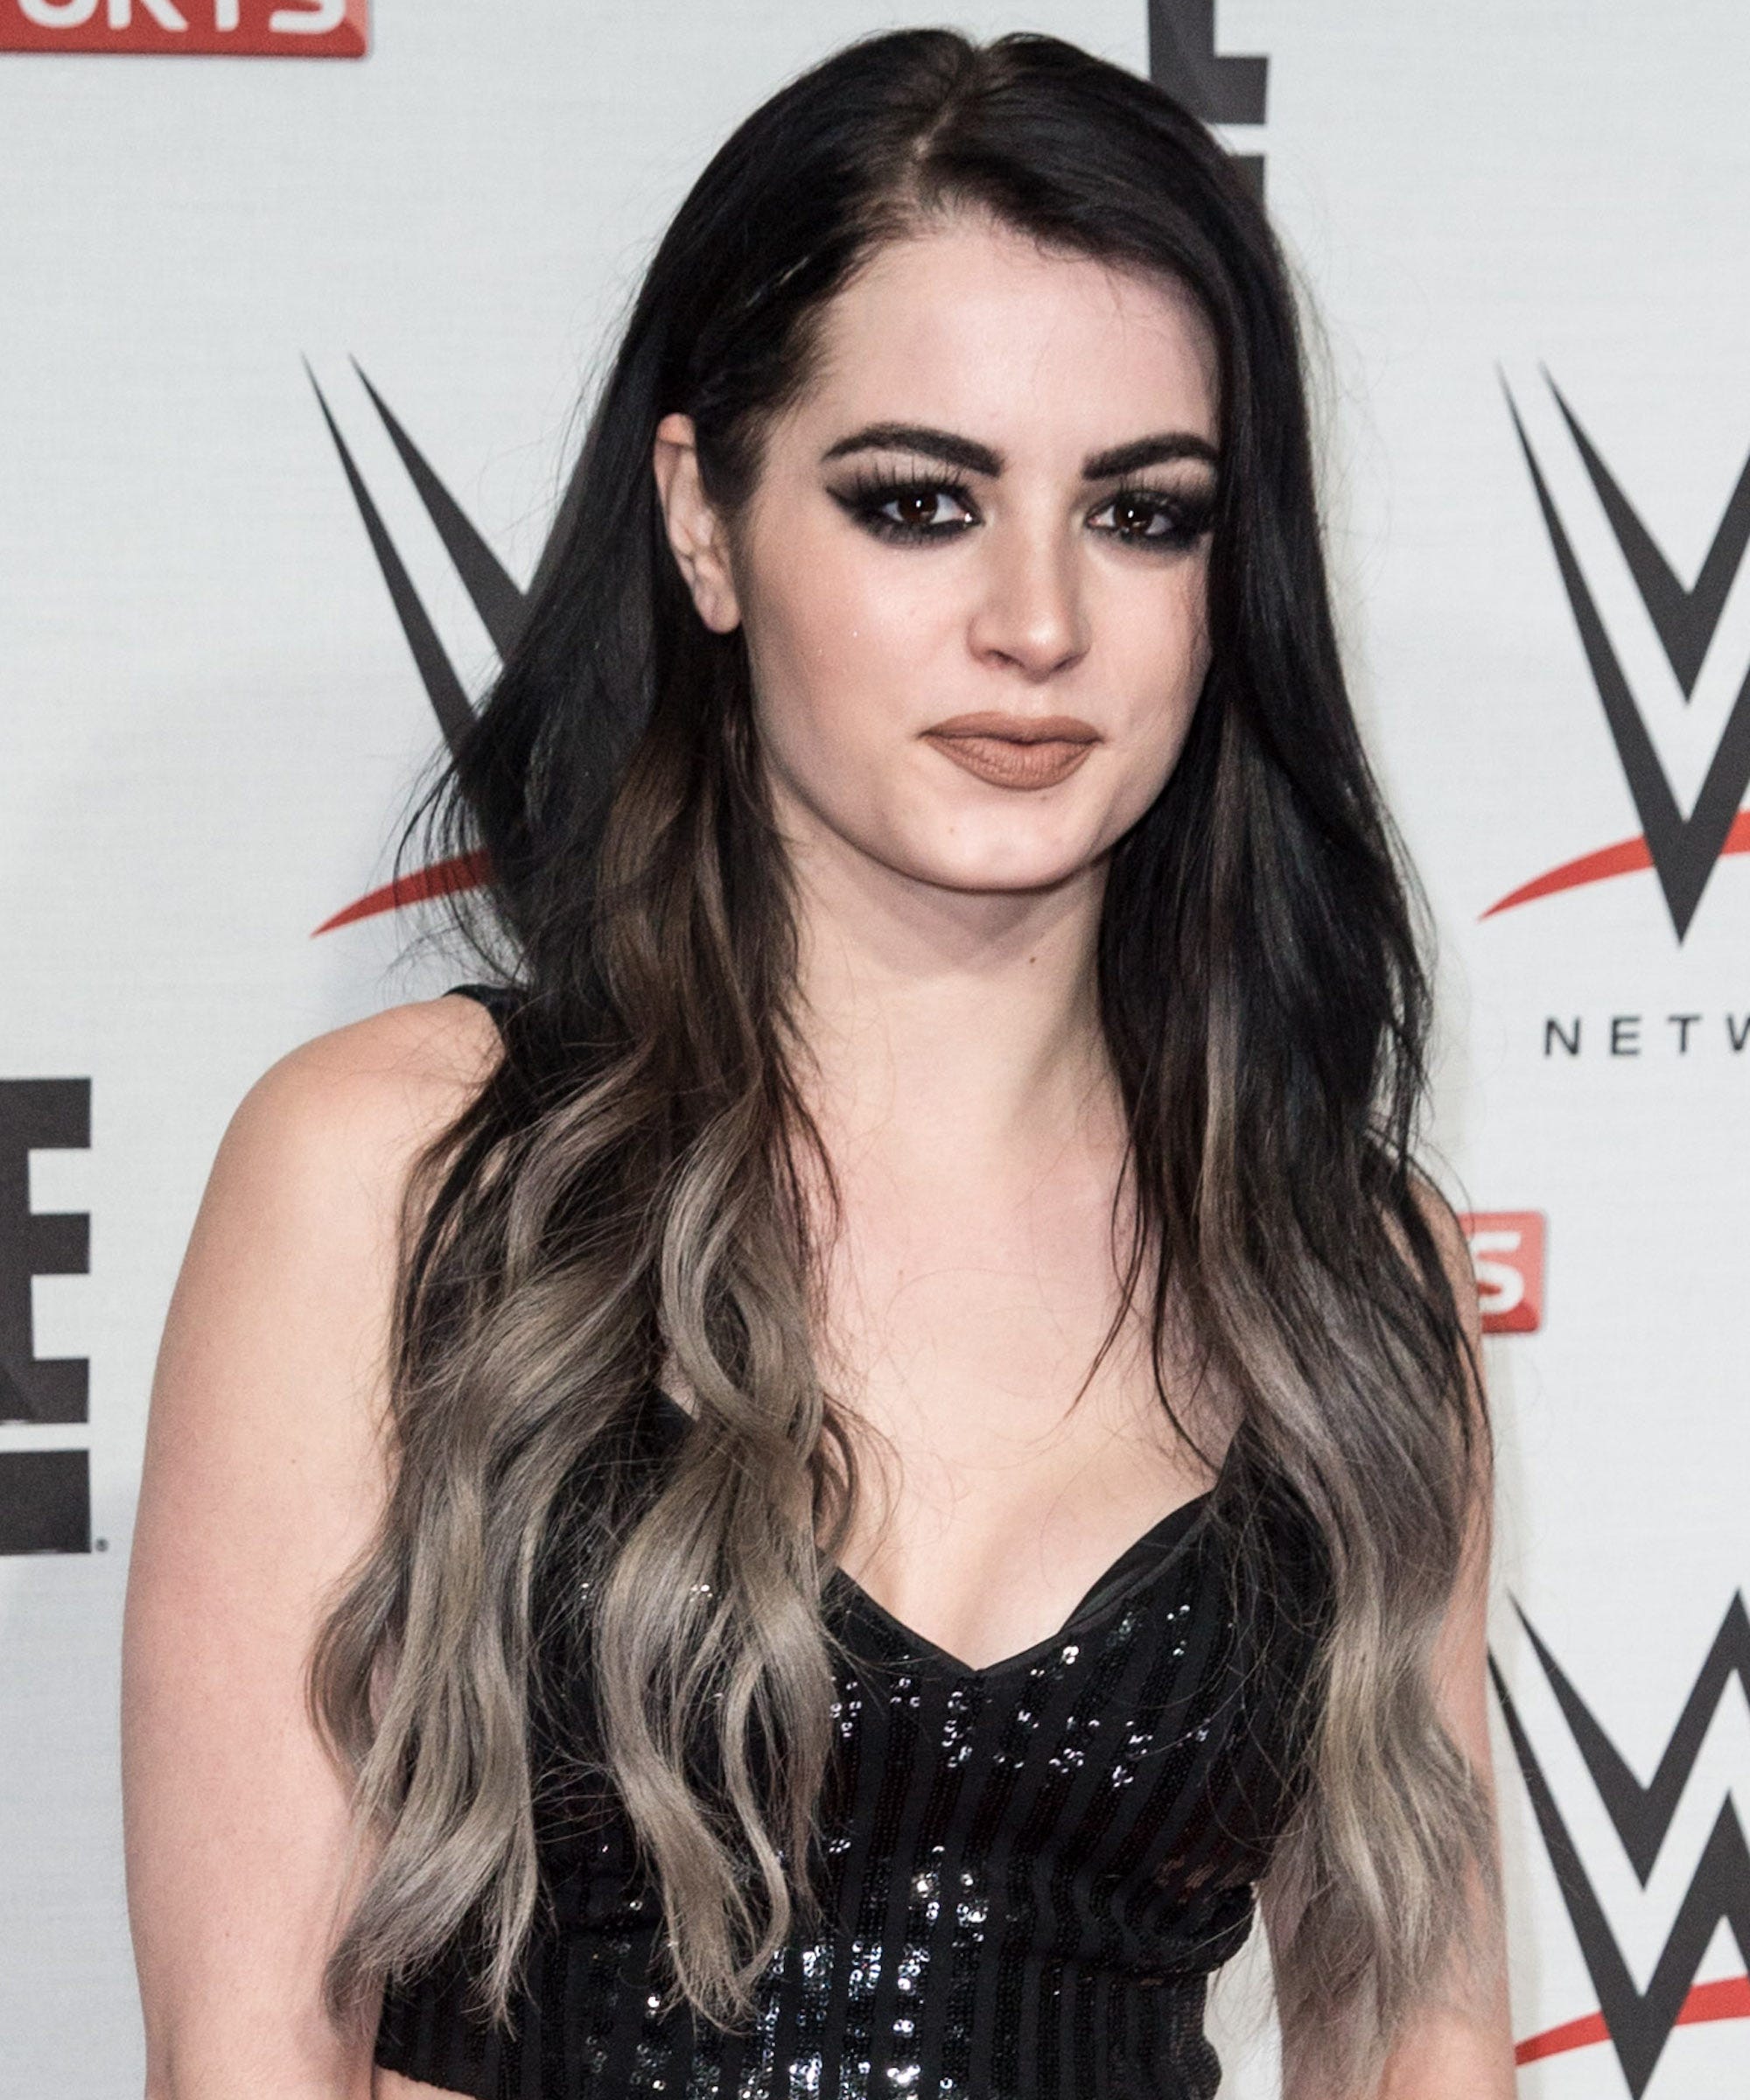 Paige Wwe Private Photos bailey brooke